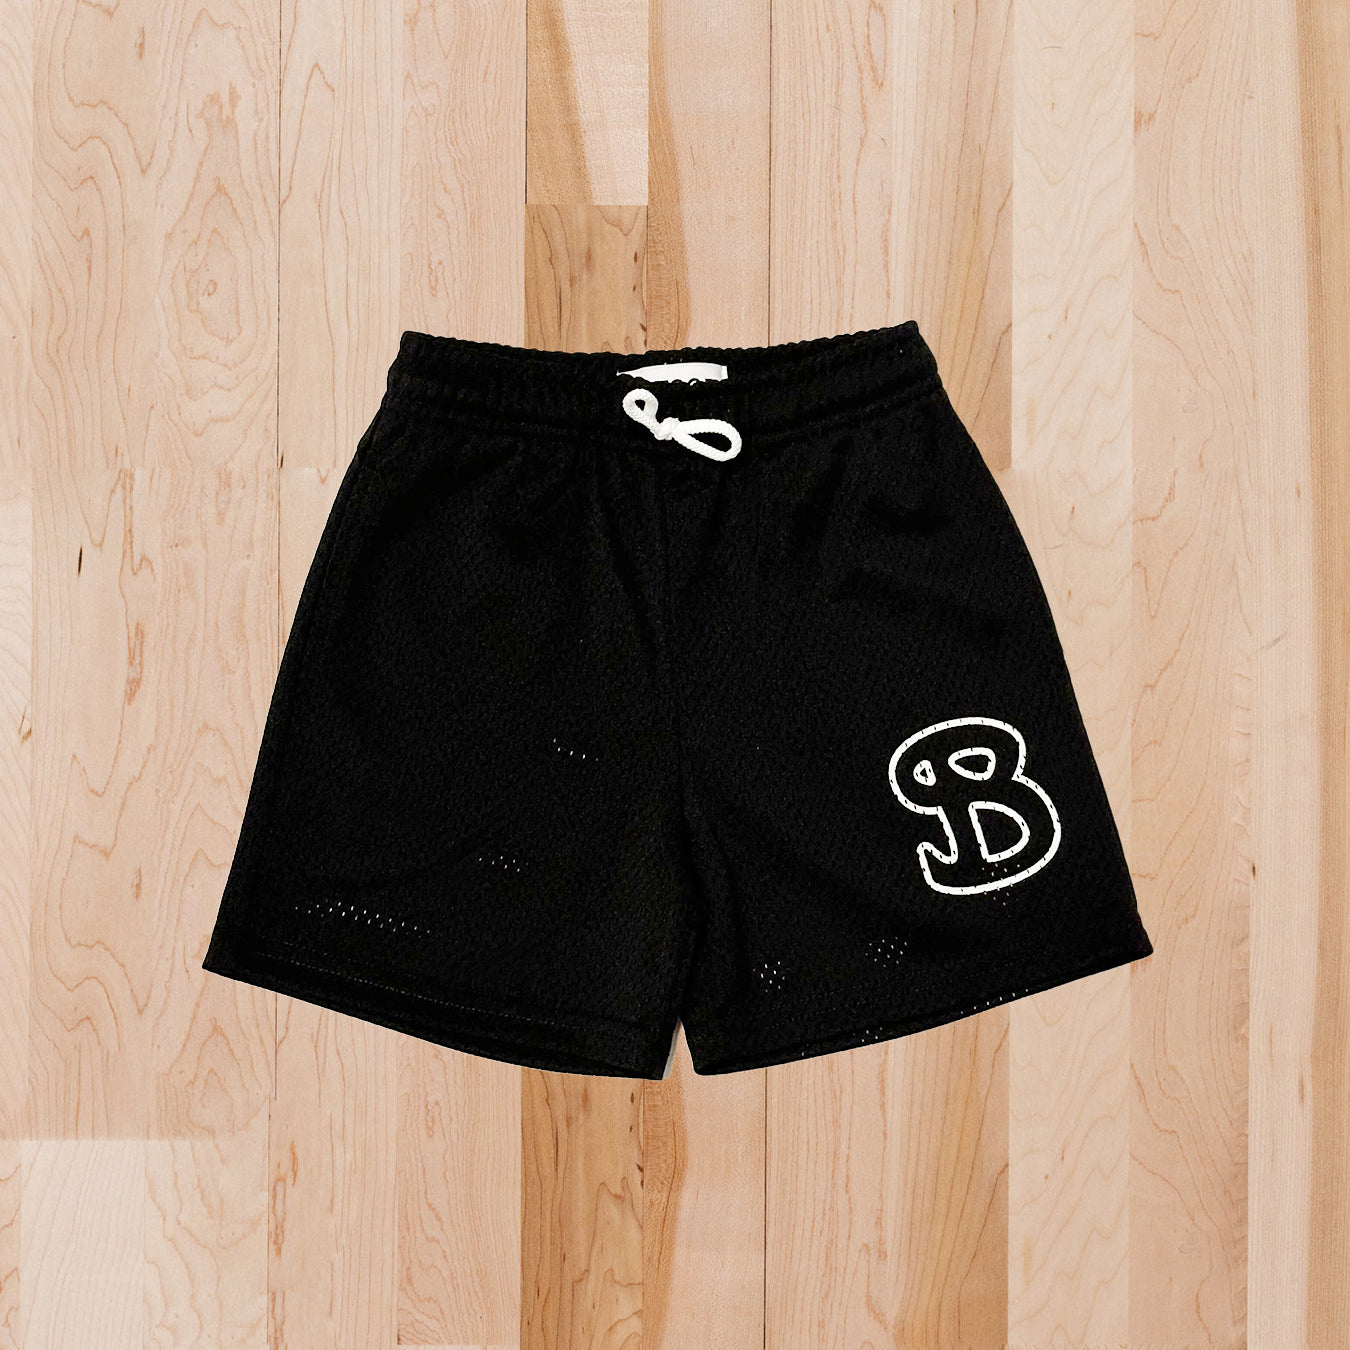 ESSENTIALS: Black Solid Shorts - YOUTH